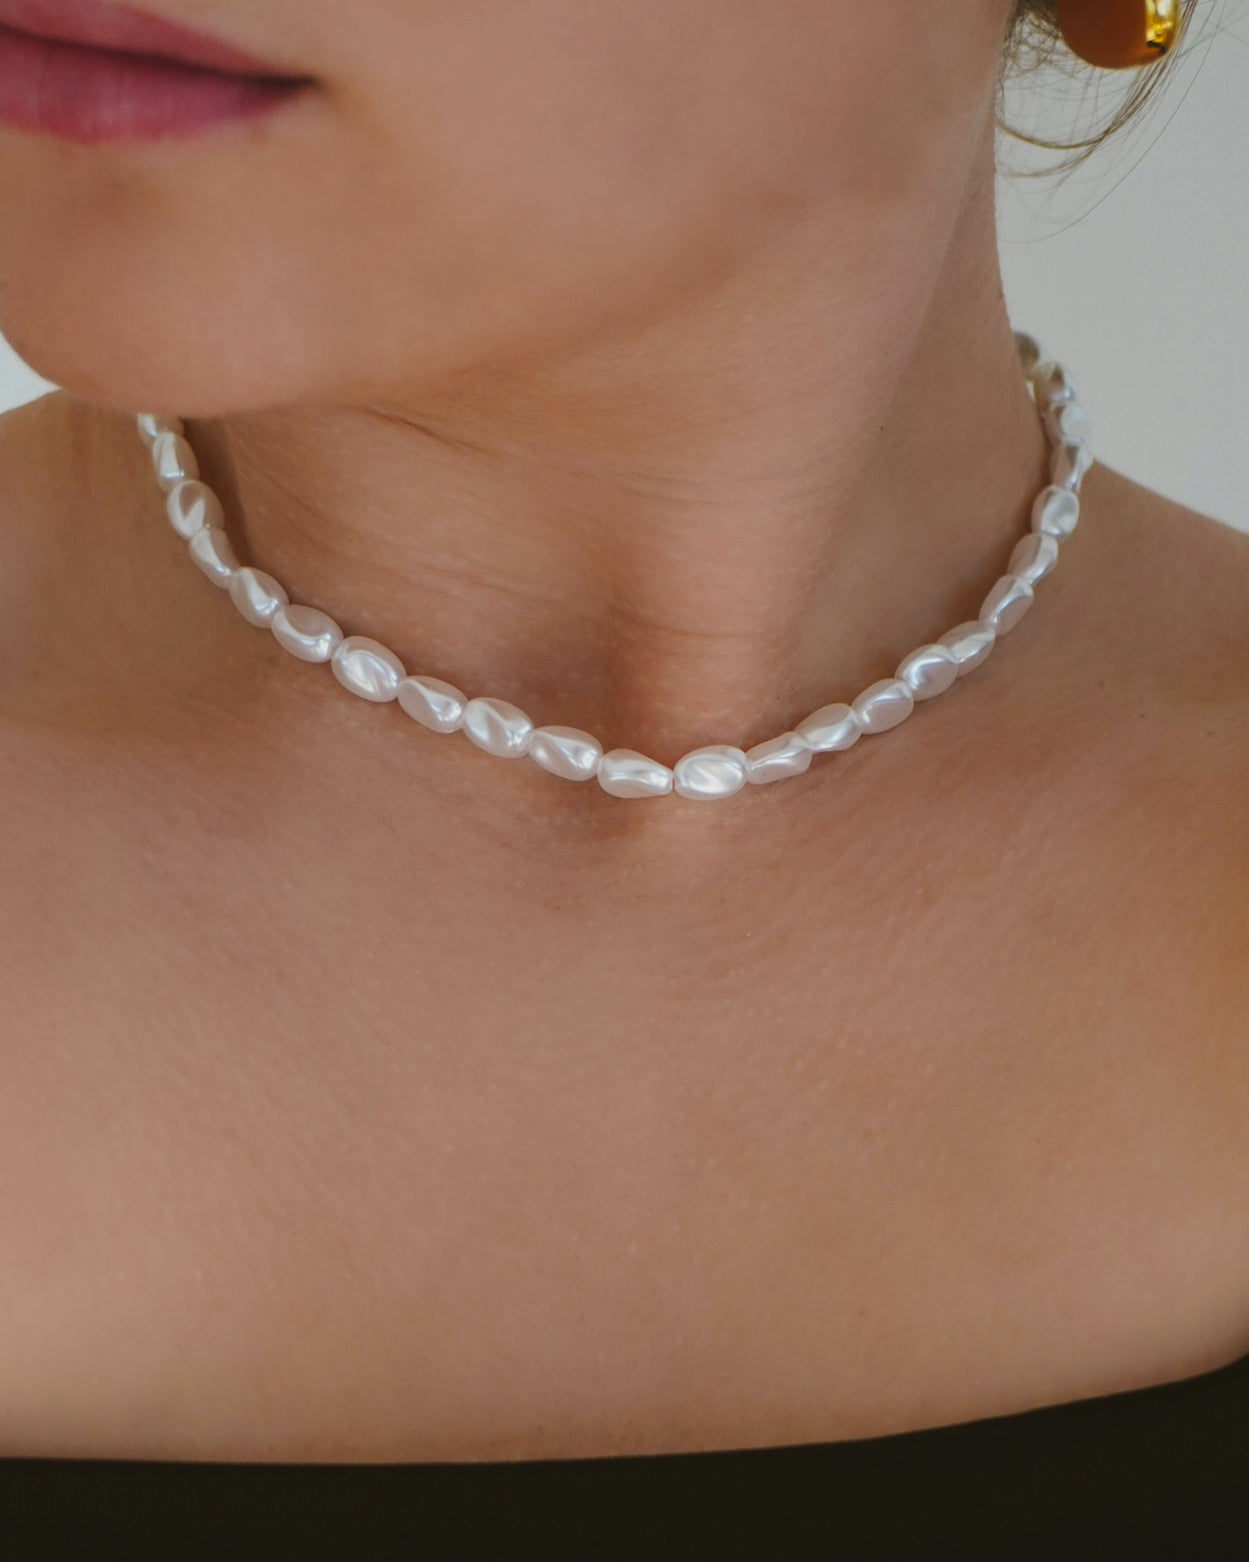 Irregular pearly necklace